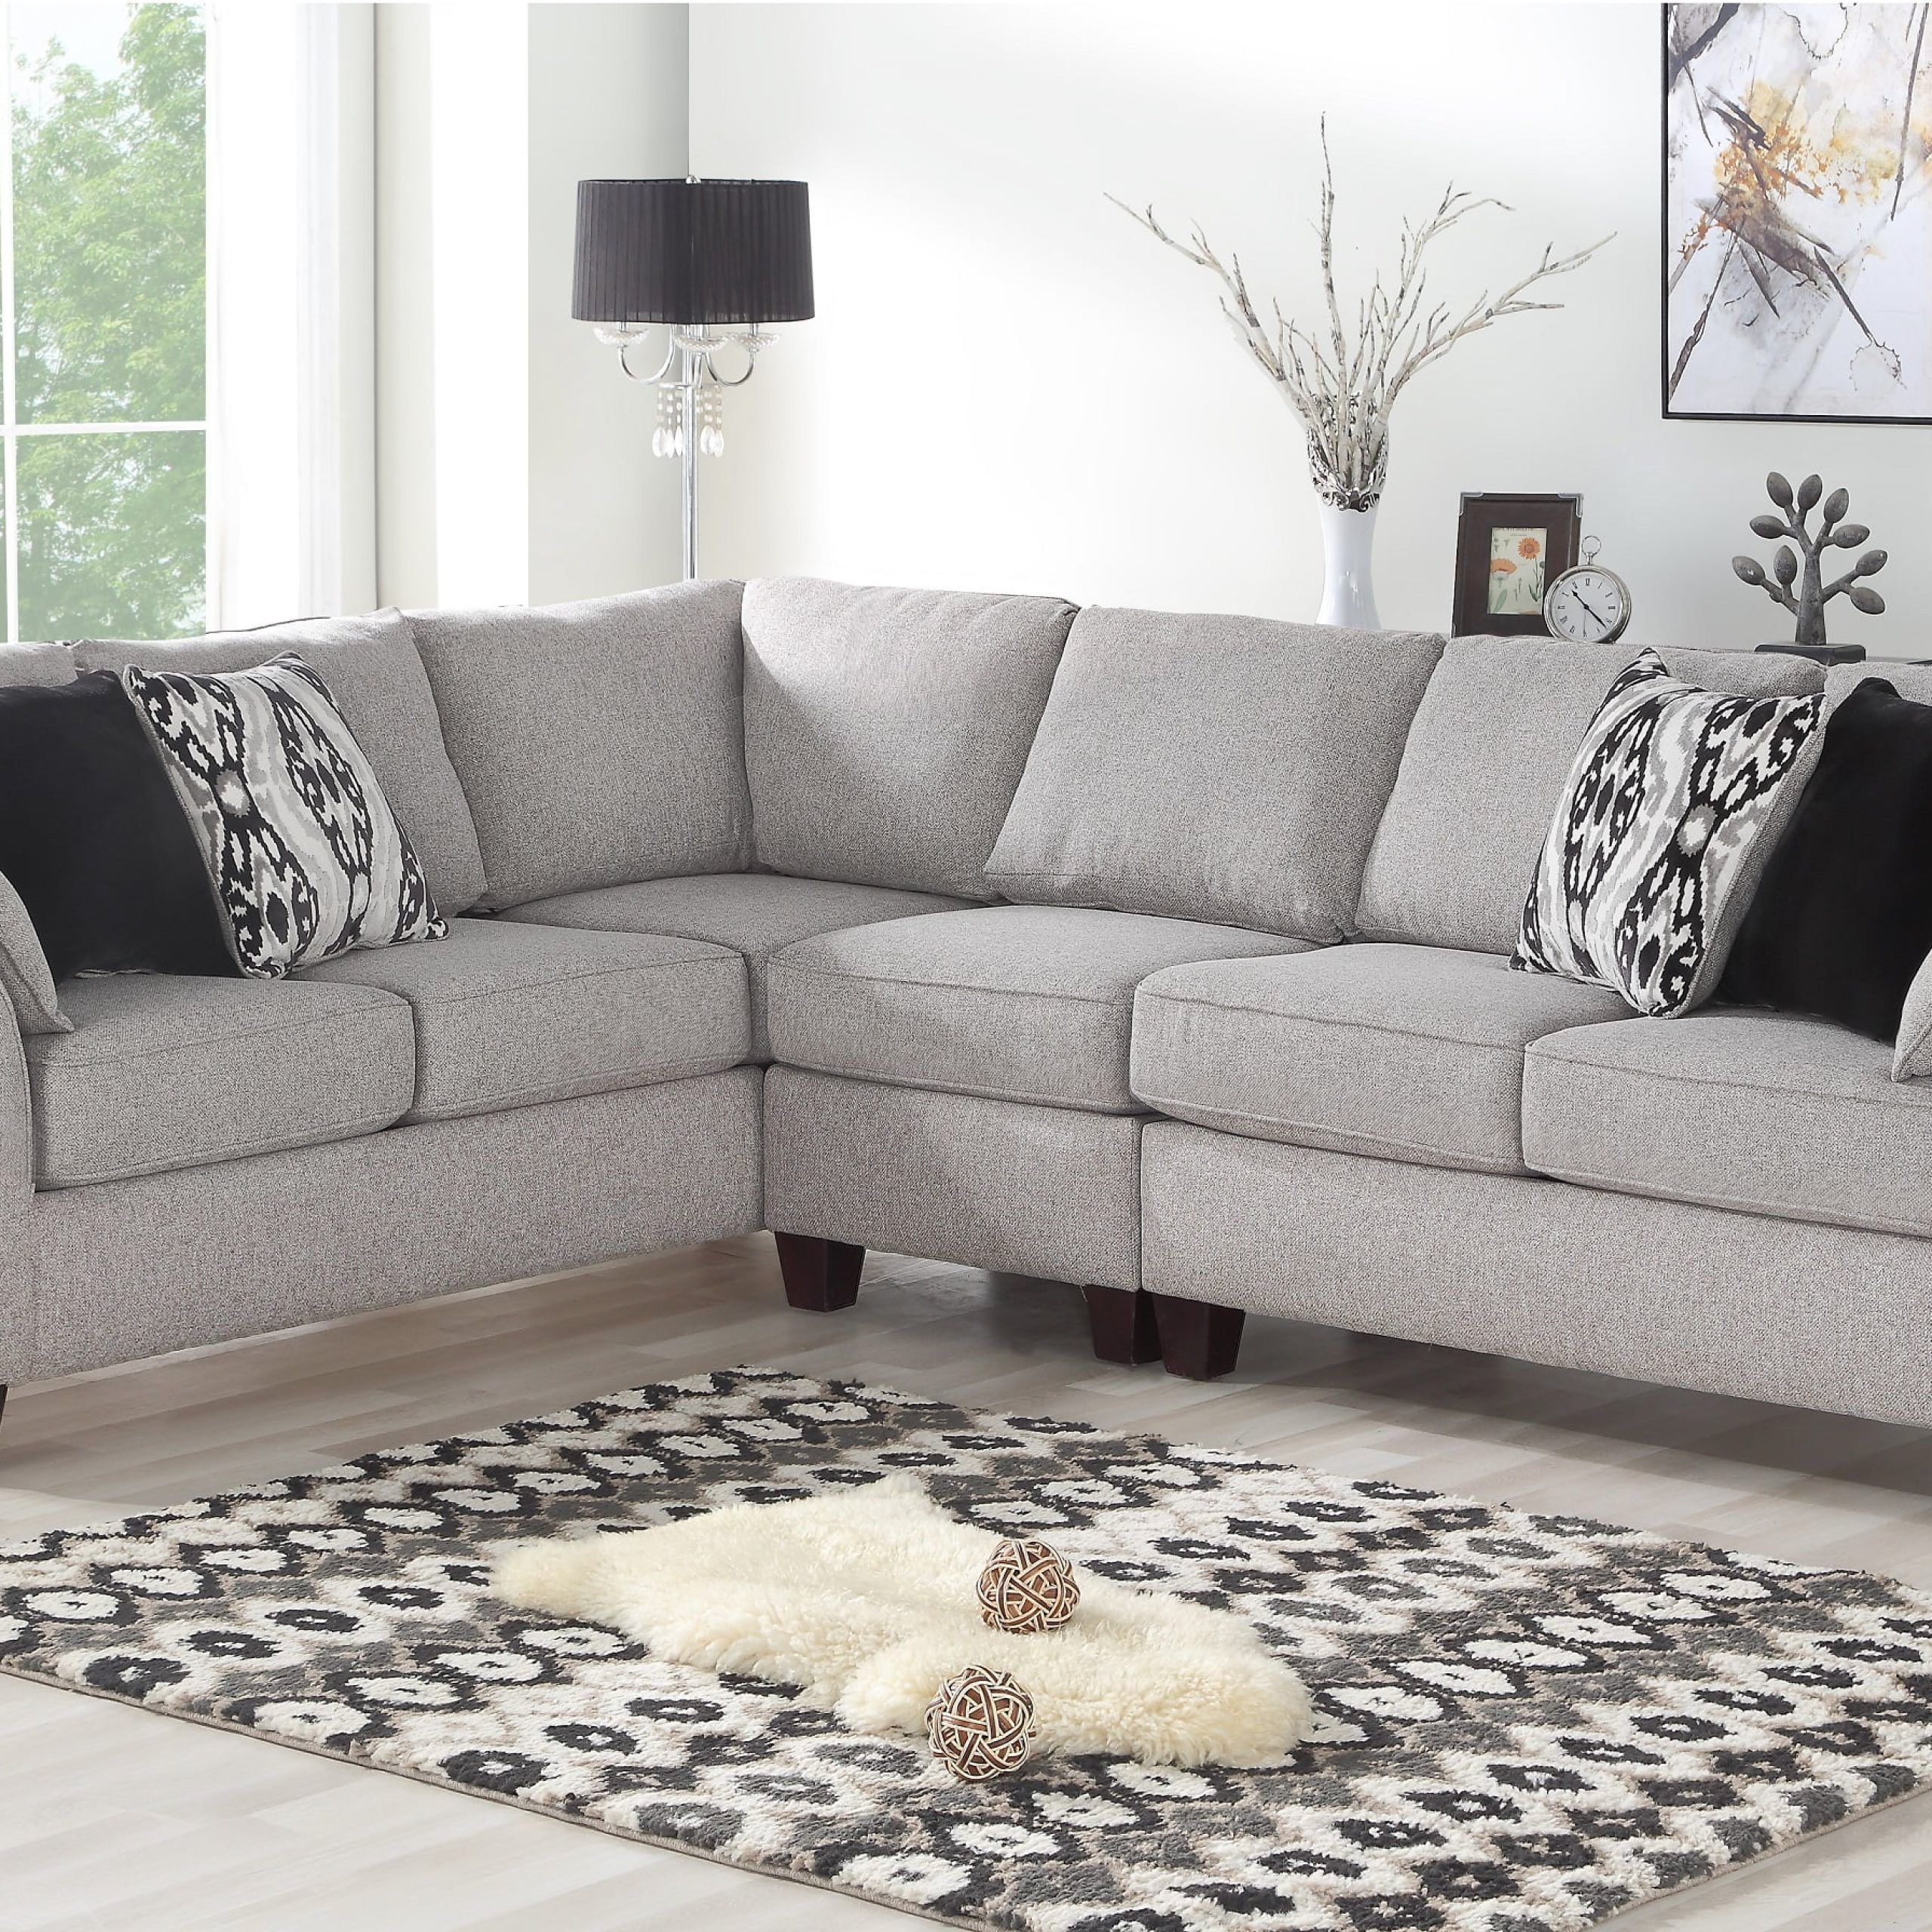 Living Room Furniture Beautiful Look Family Seating 3pc Sectional Sofa For Sofas For Living Rooms (View 12 of 20)